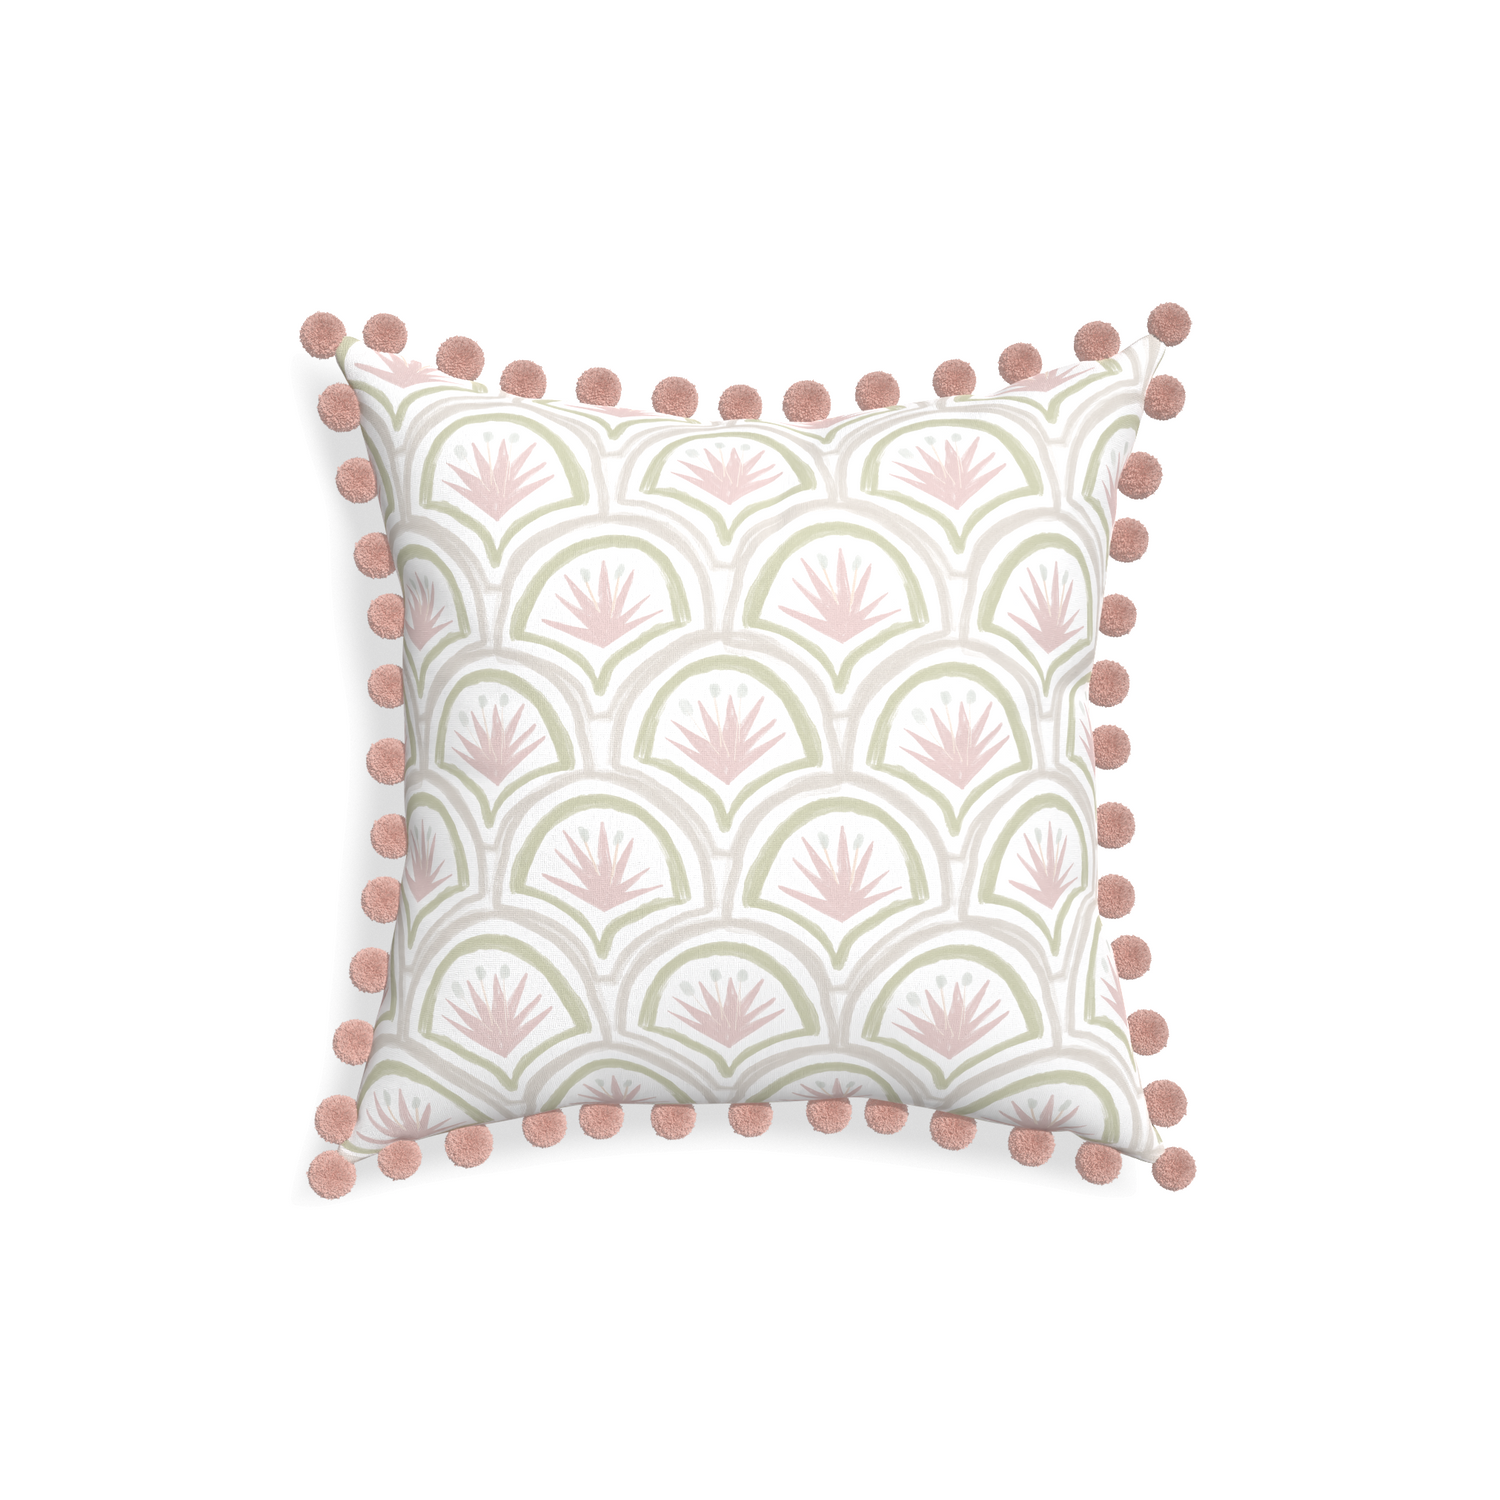 18-square thatcher rose custom pink & green palmpillow with rose pom pom on white background